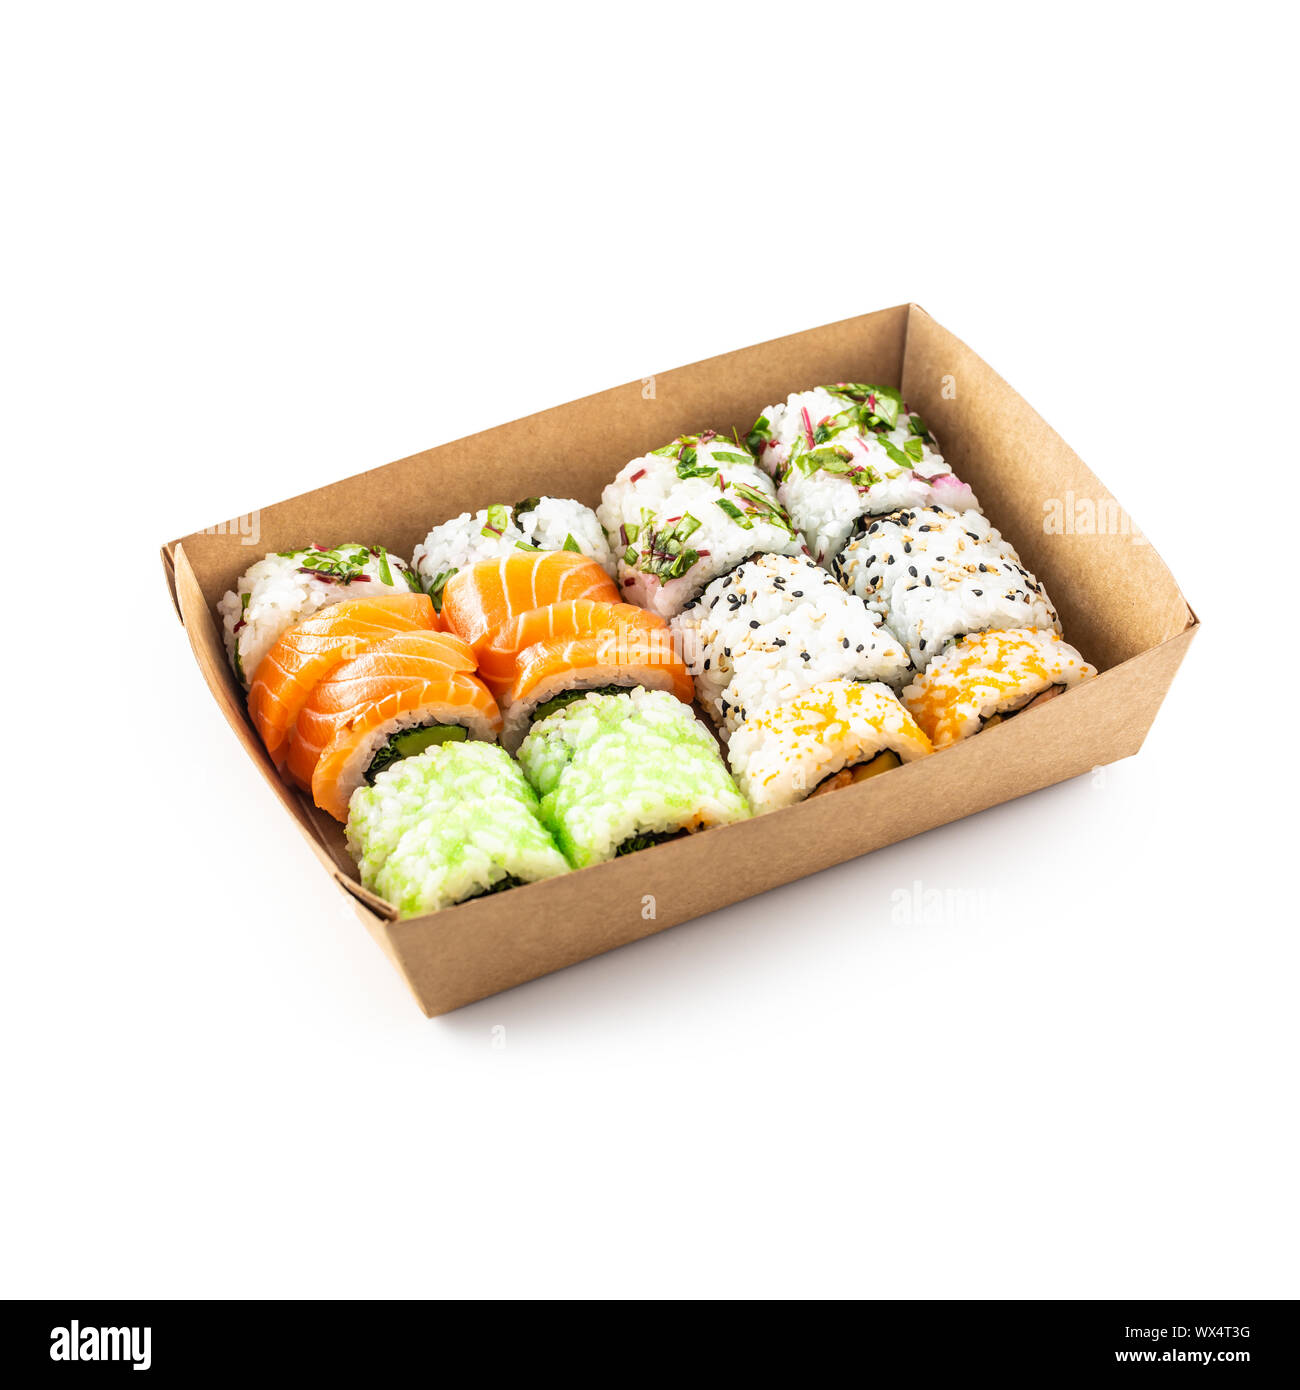 https://c8.alamy.com/comp/WX4T3G/sushi-in-a-box-of-recycled-paper-isolated-on-white-background-concept-of-organic-food-packaging-WX4T3G.jpg